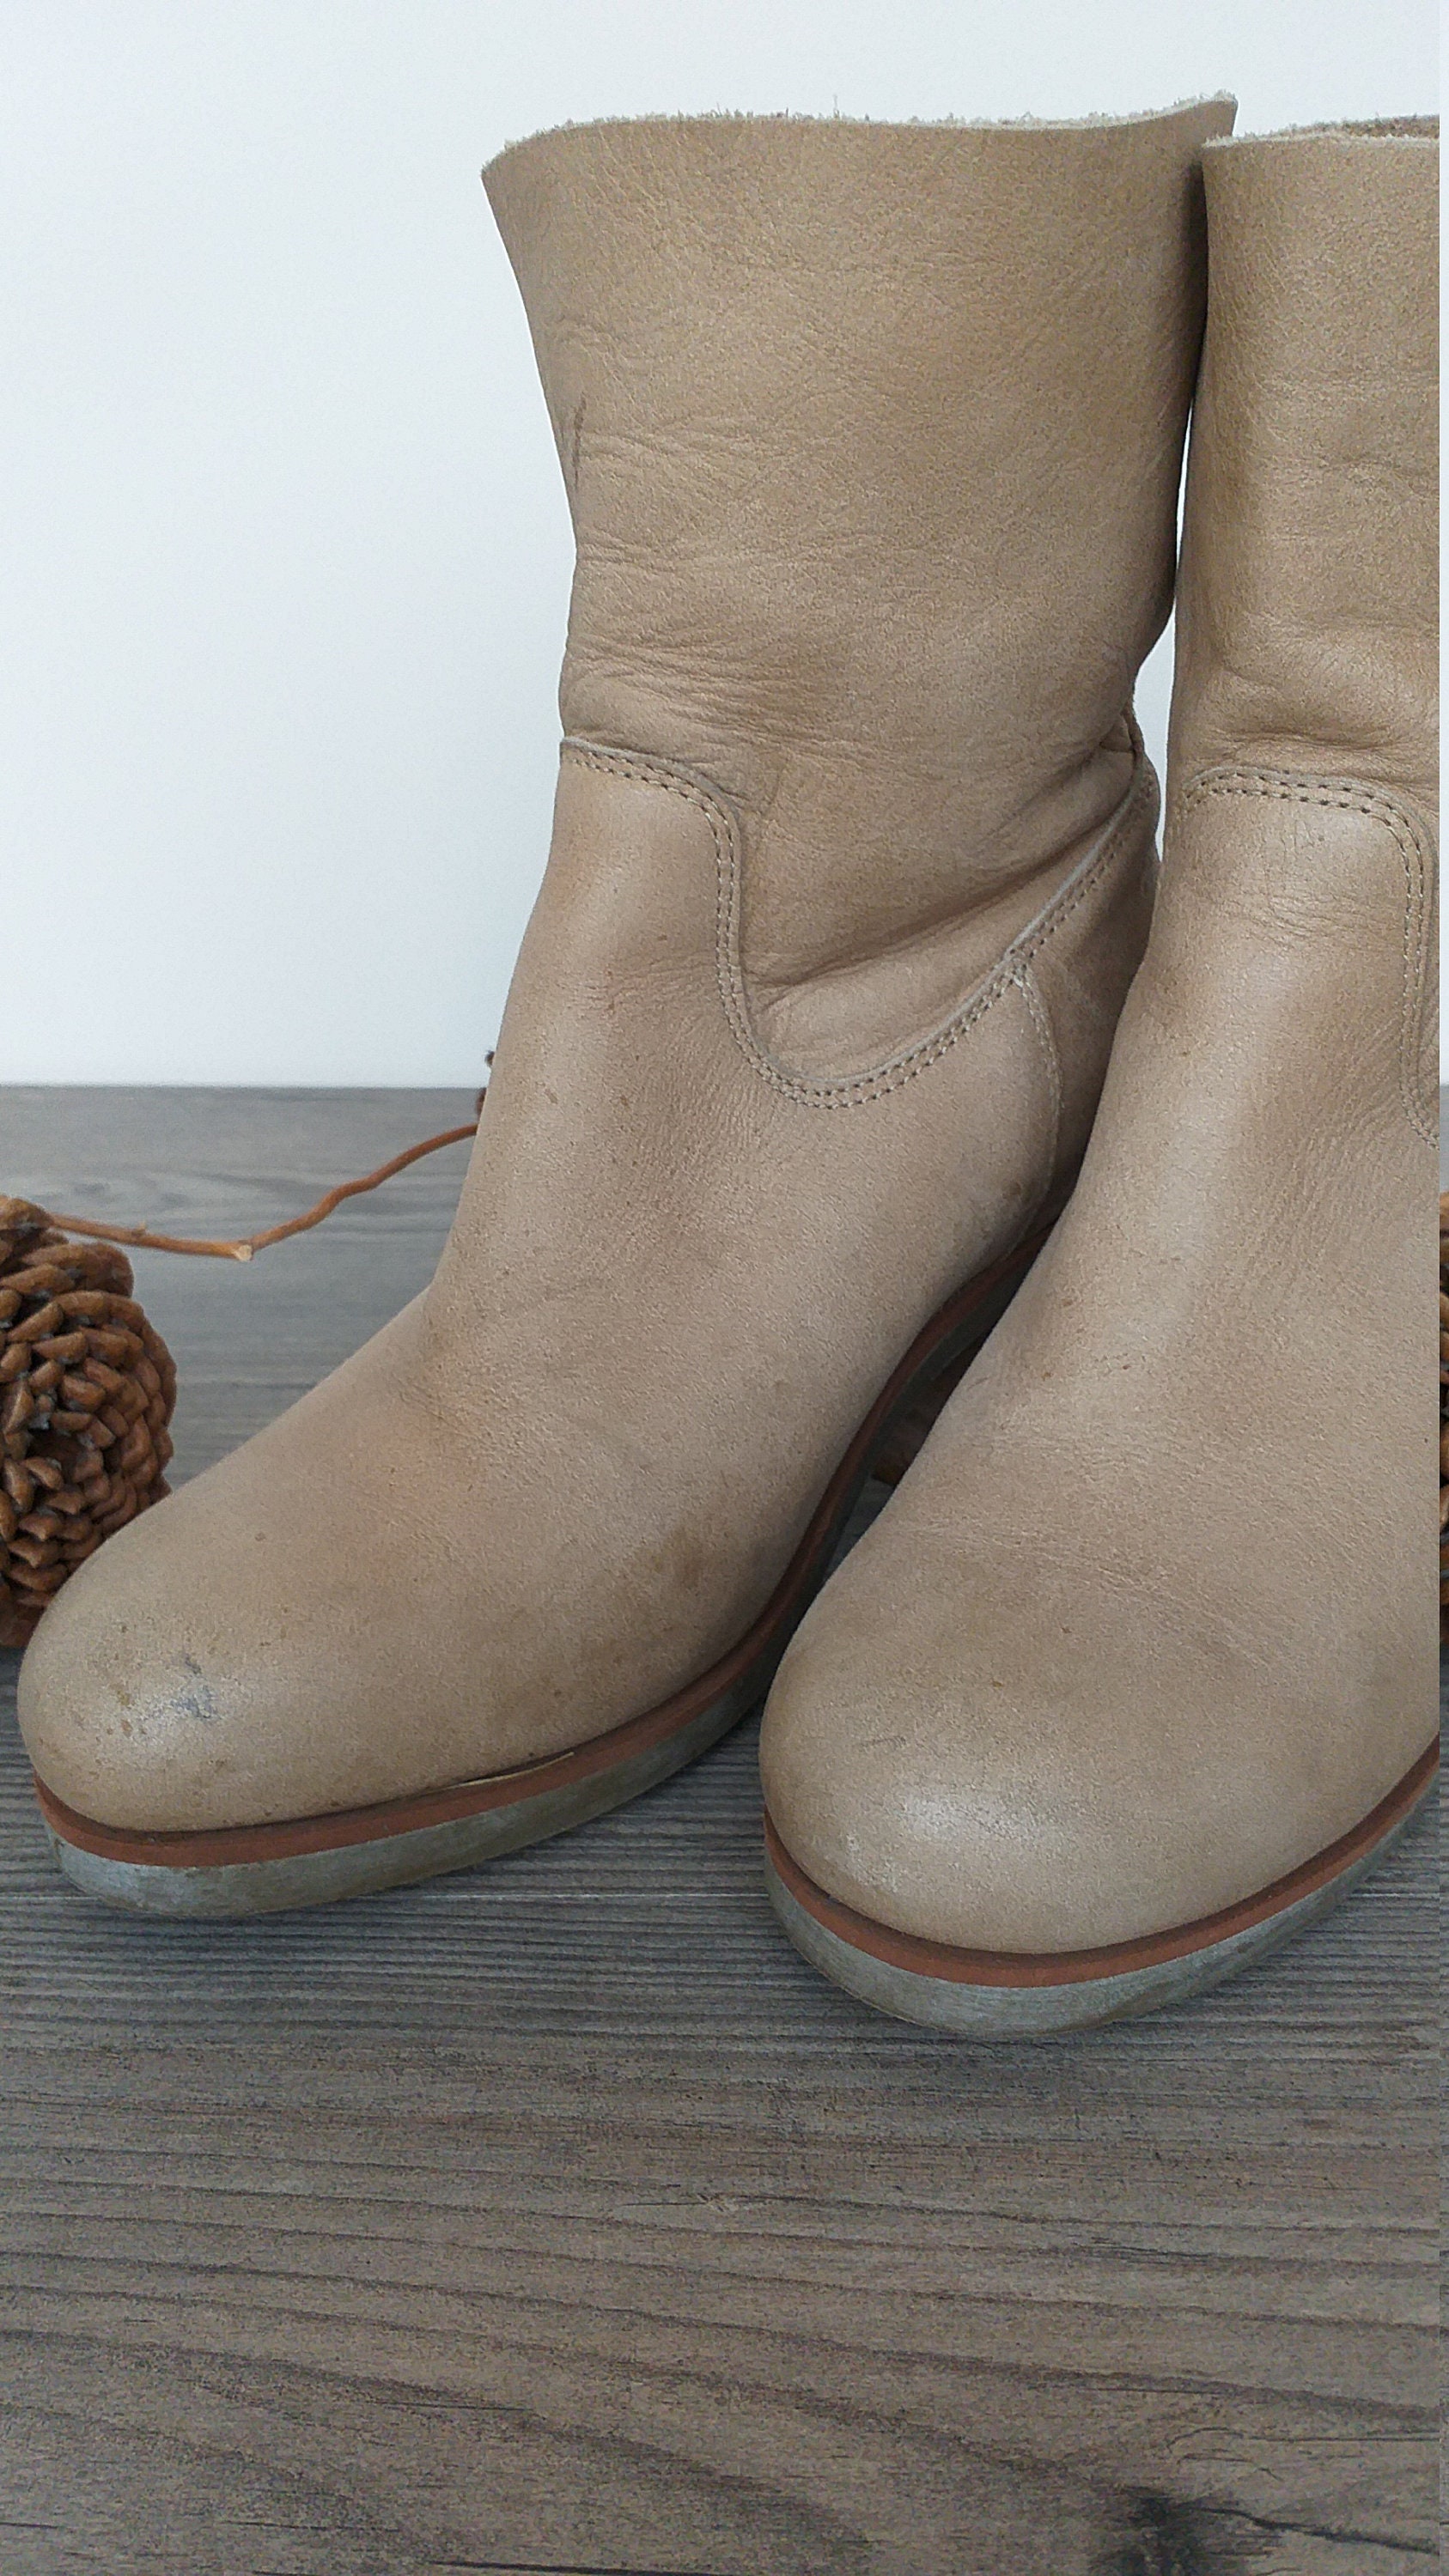 Vintage Ankle Heels Women Beige Leather Boots Shoes/ Size US - Etsy